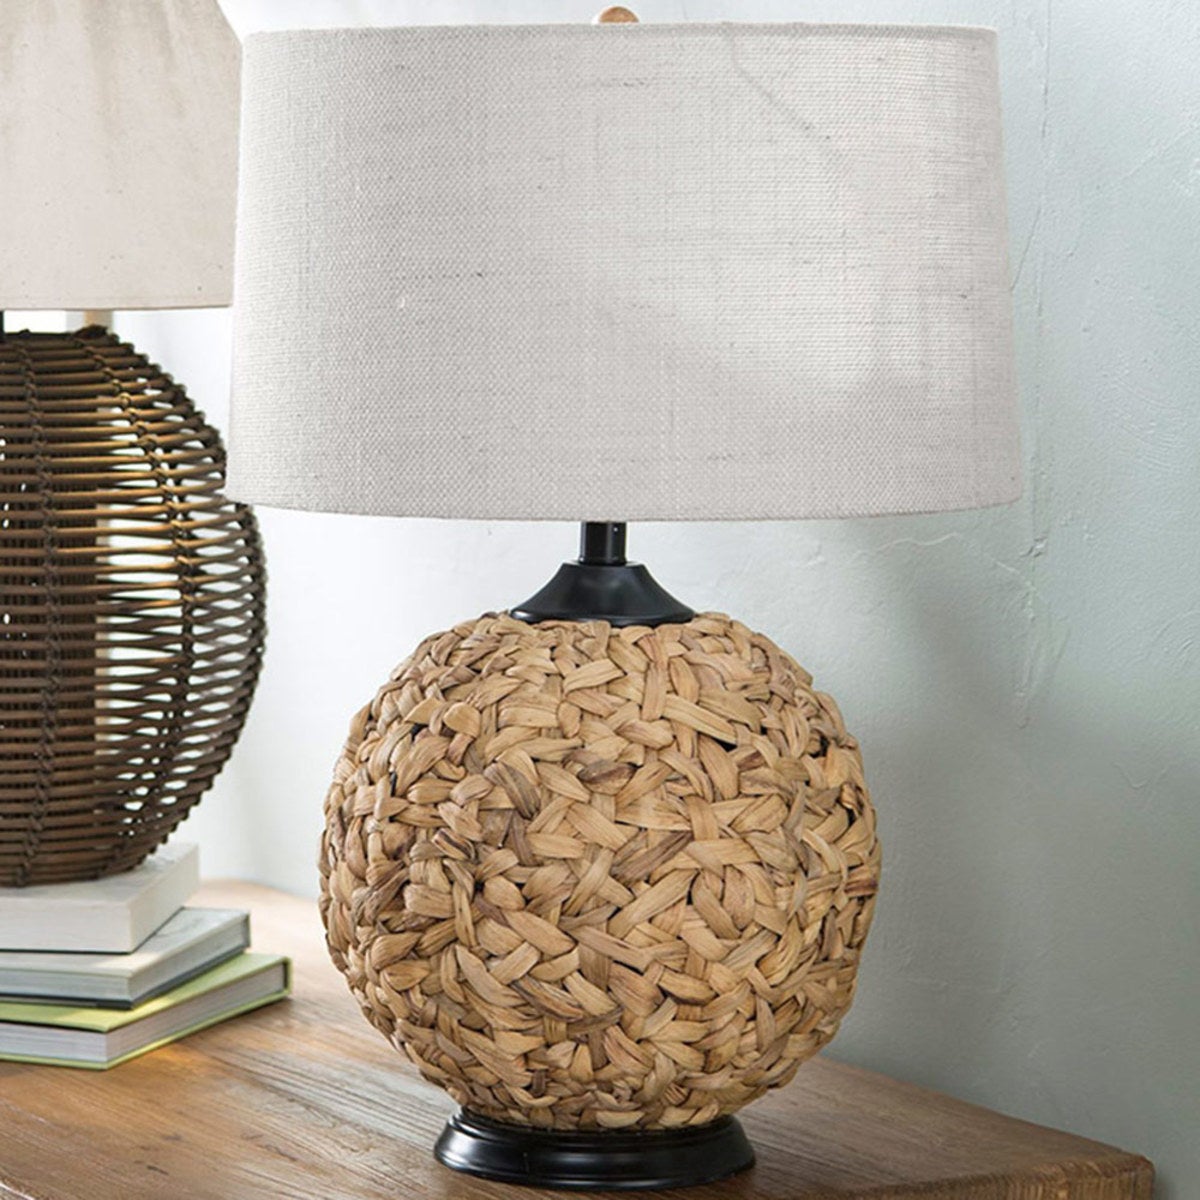 Woven Seagrass Table Lamp